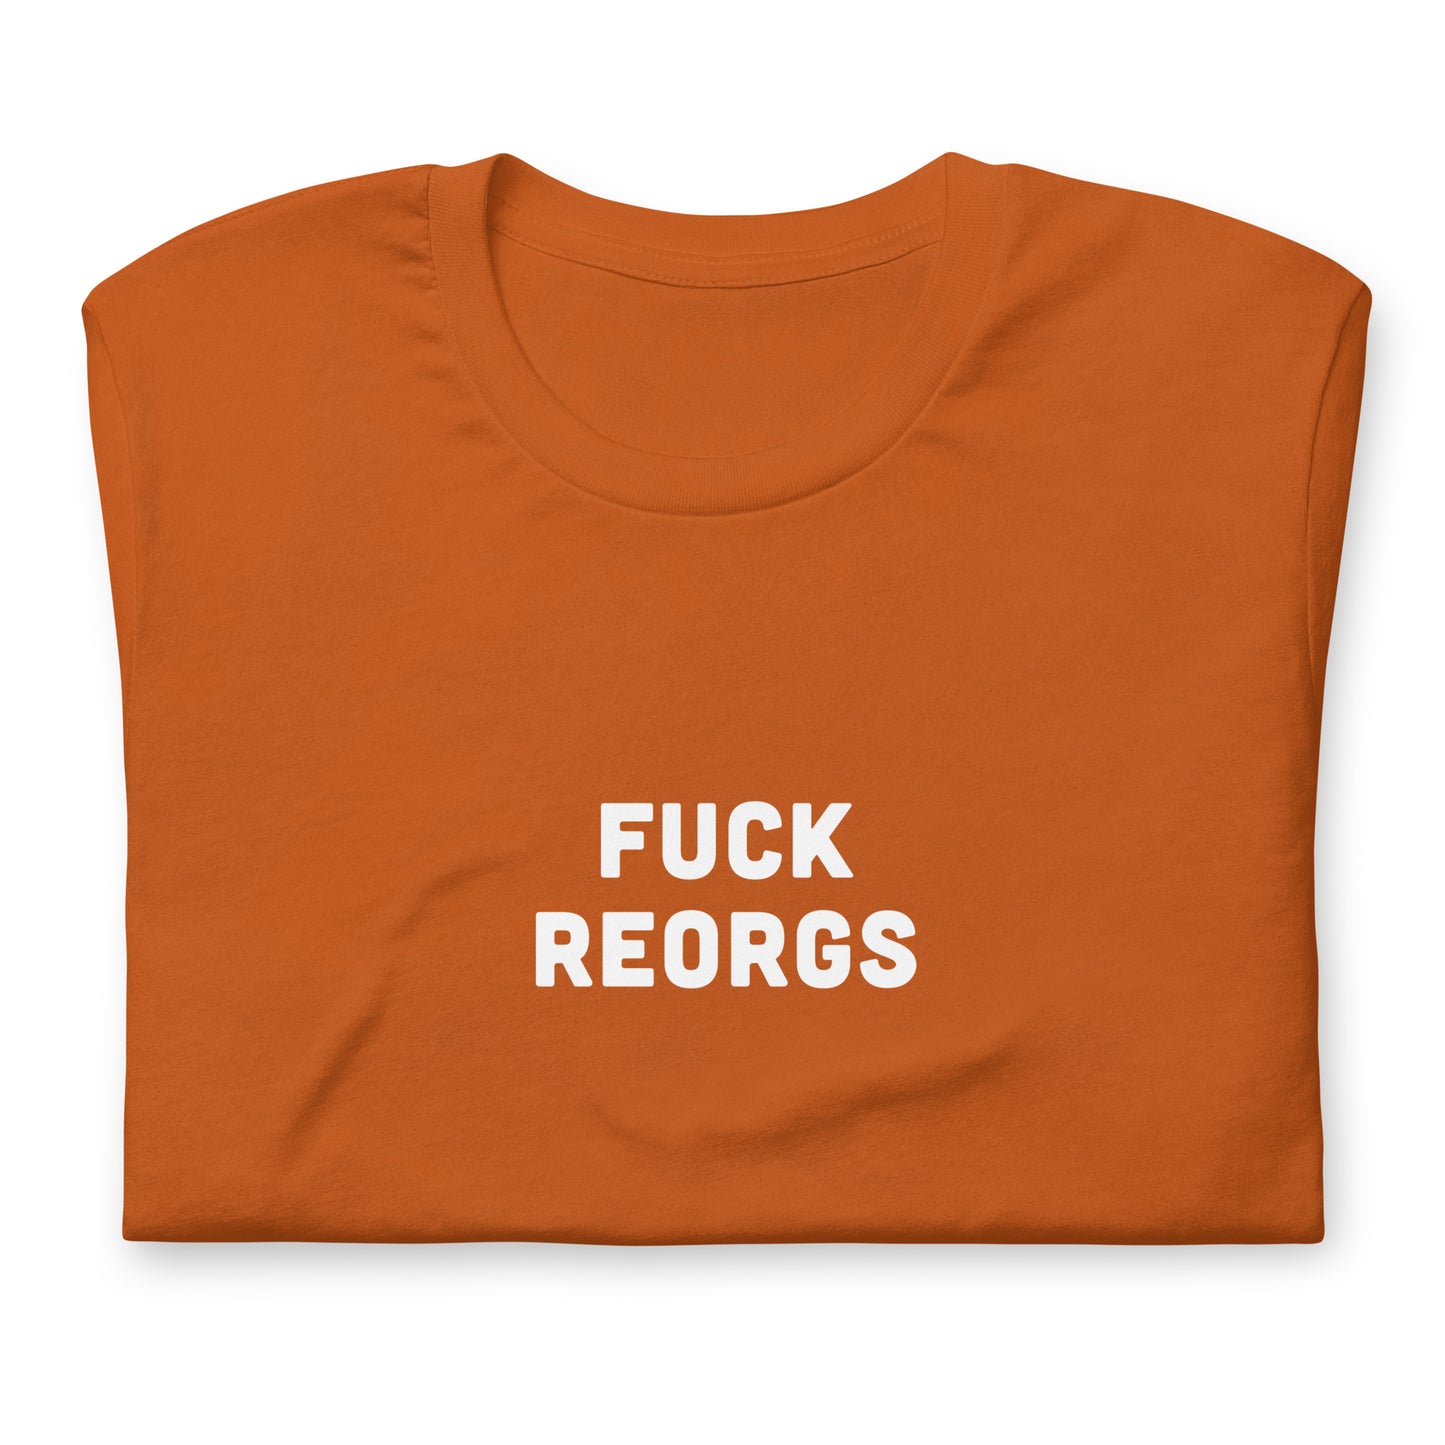 Fuck Reorgs T-Shirt Size M Color Navy